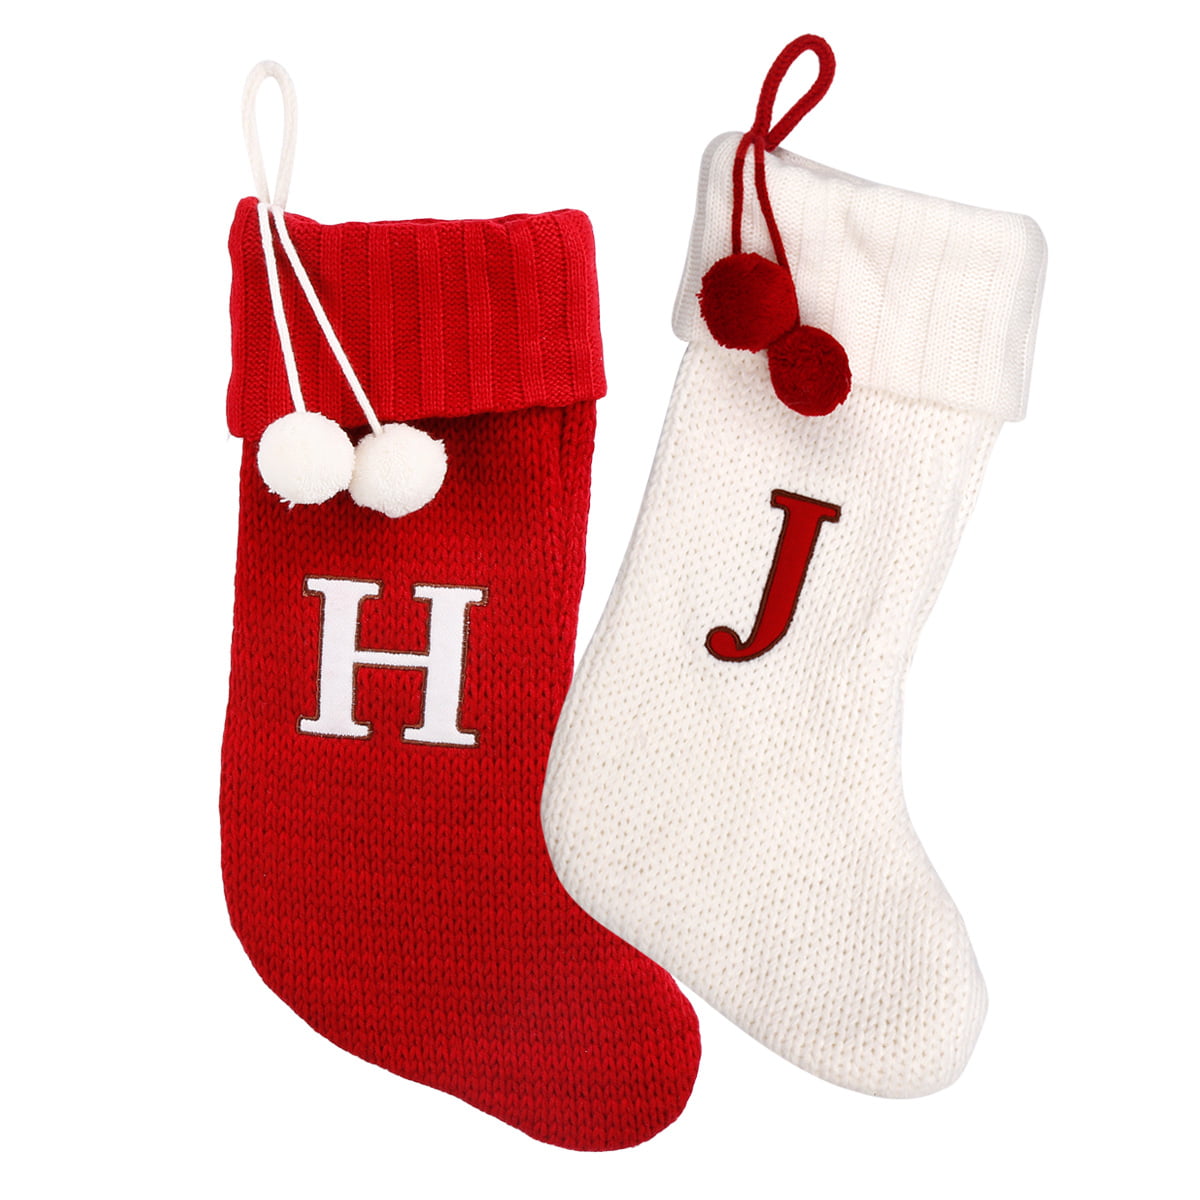 Details about   St Nicholas Square Monogram F Red Cable Knit Christmas Stocking New 21" 